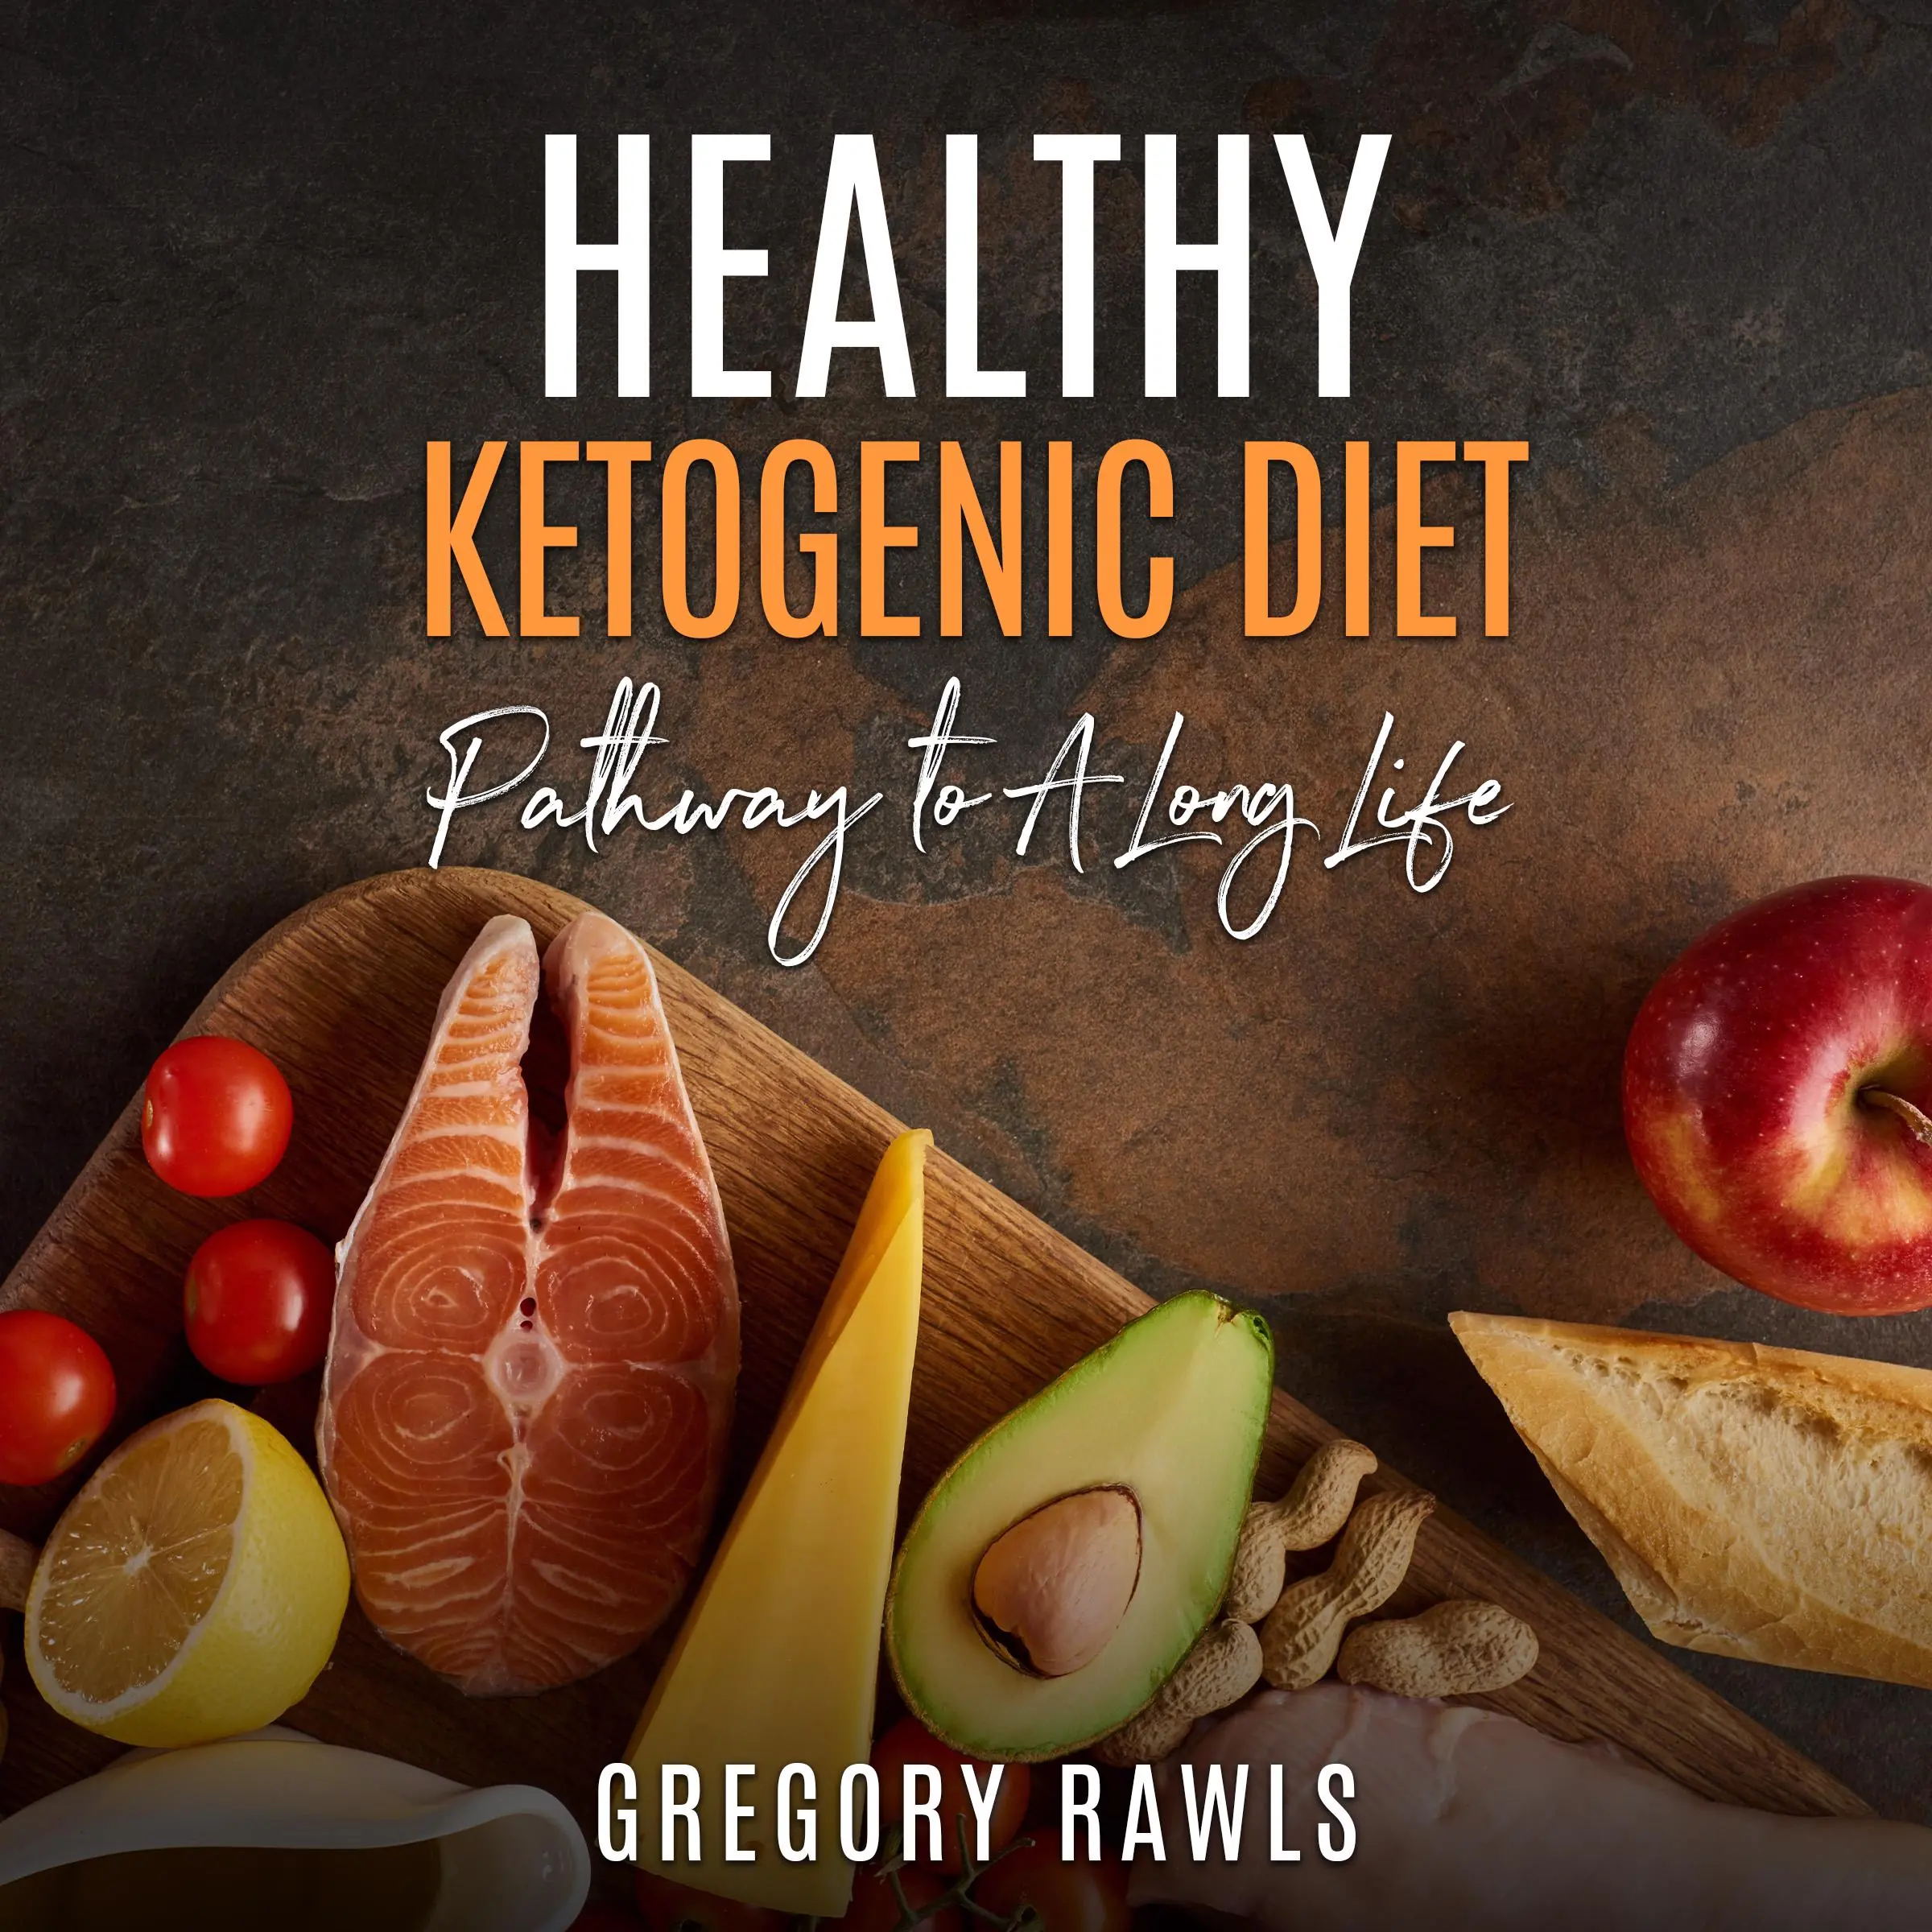 Healthy Ketogenic Diet Audiobook by Gregory Rawls